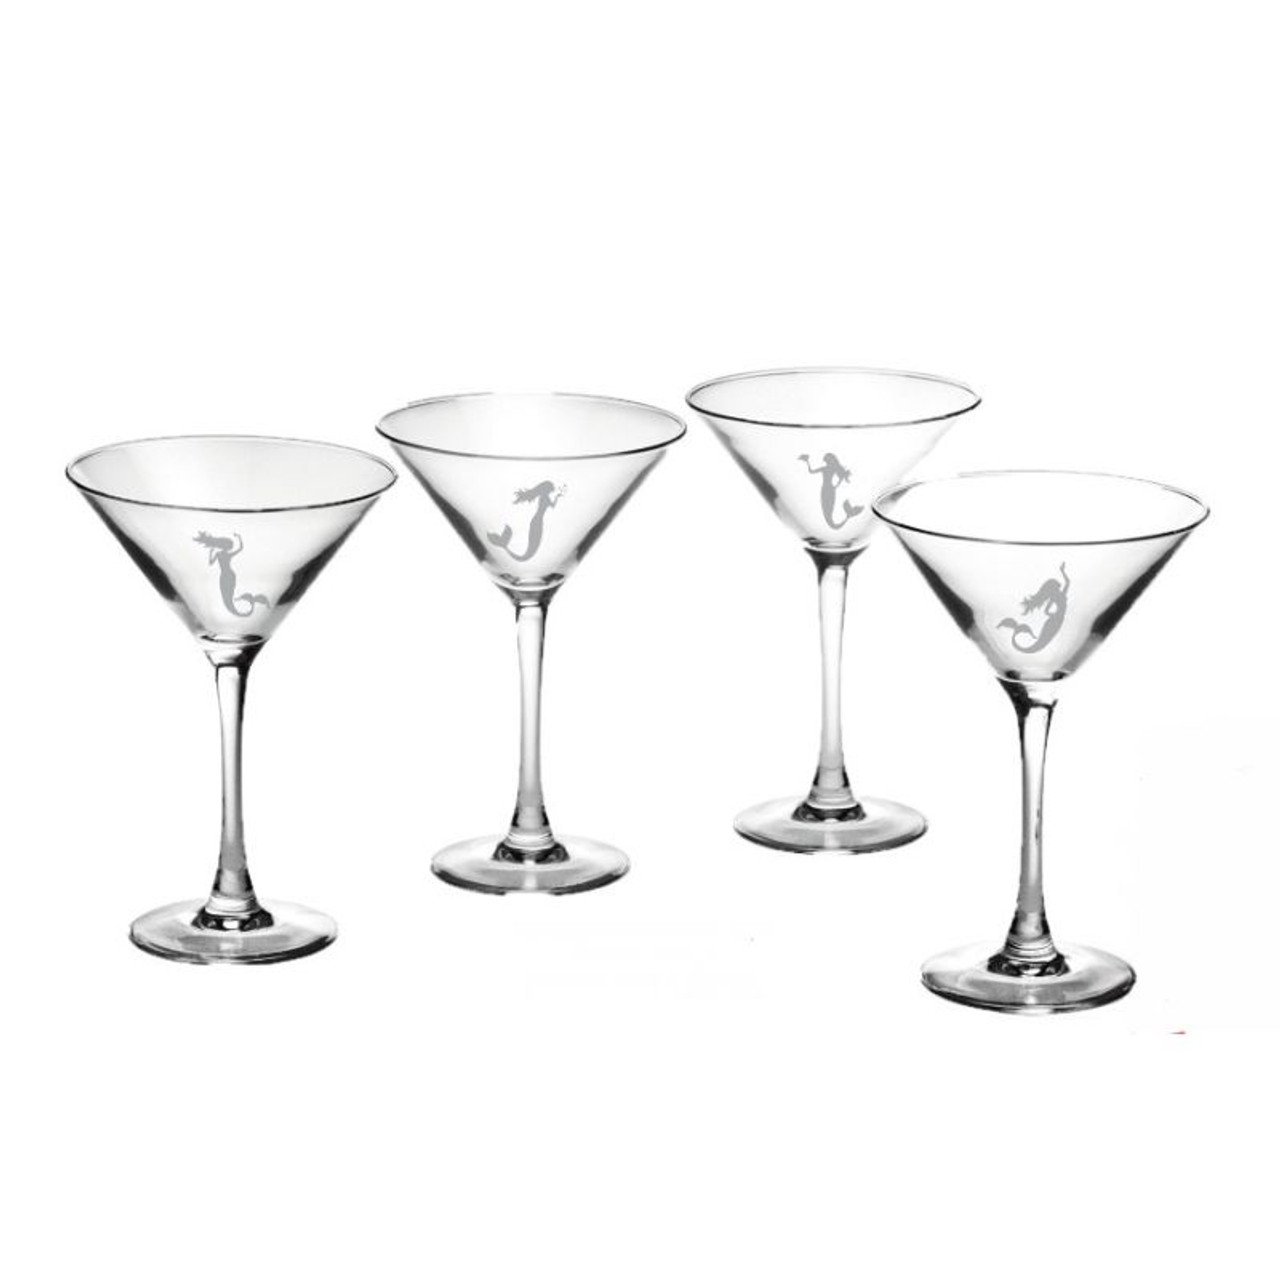 Shop Hyacinth Martini Glass Set of 4 For Your Coastal Home, Coastal &  Nautical Bar Carts & Accessories For Your Dining Room or Kitchen